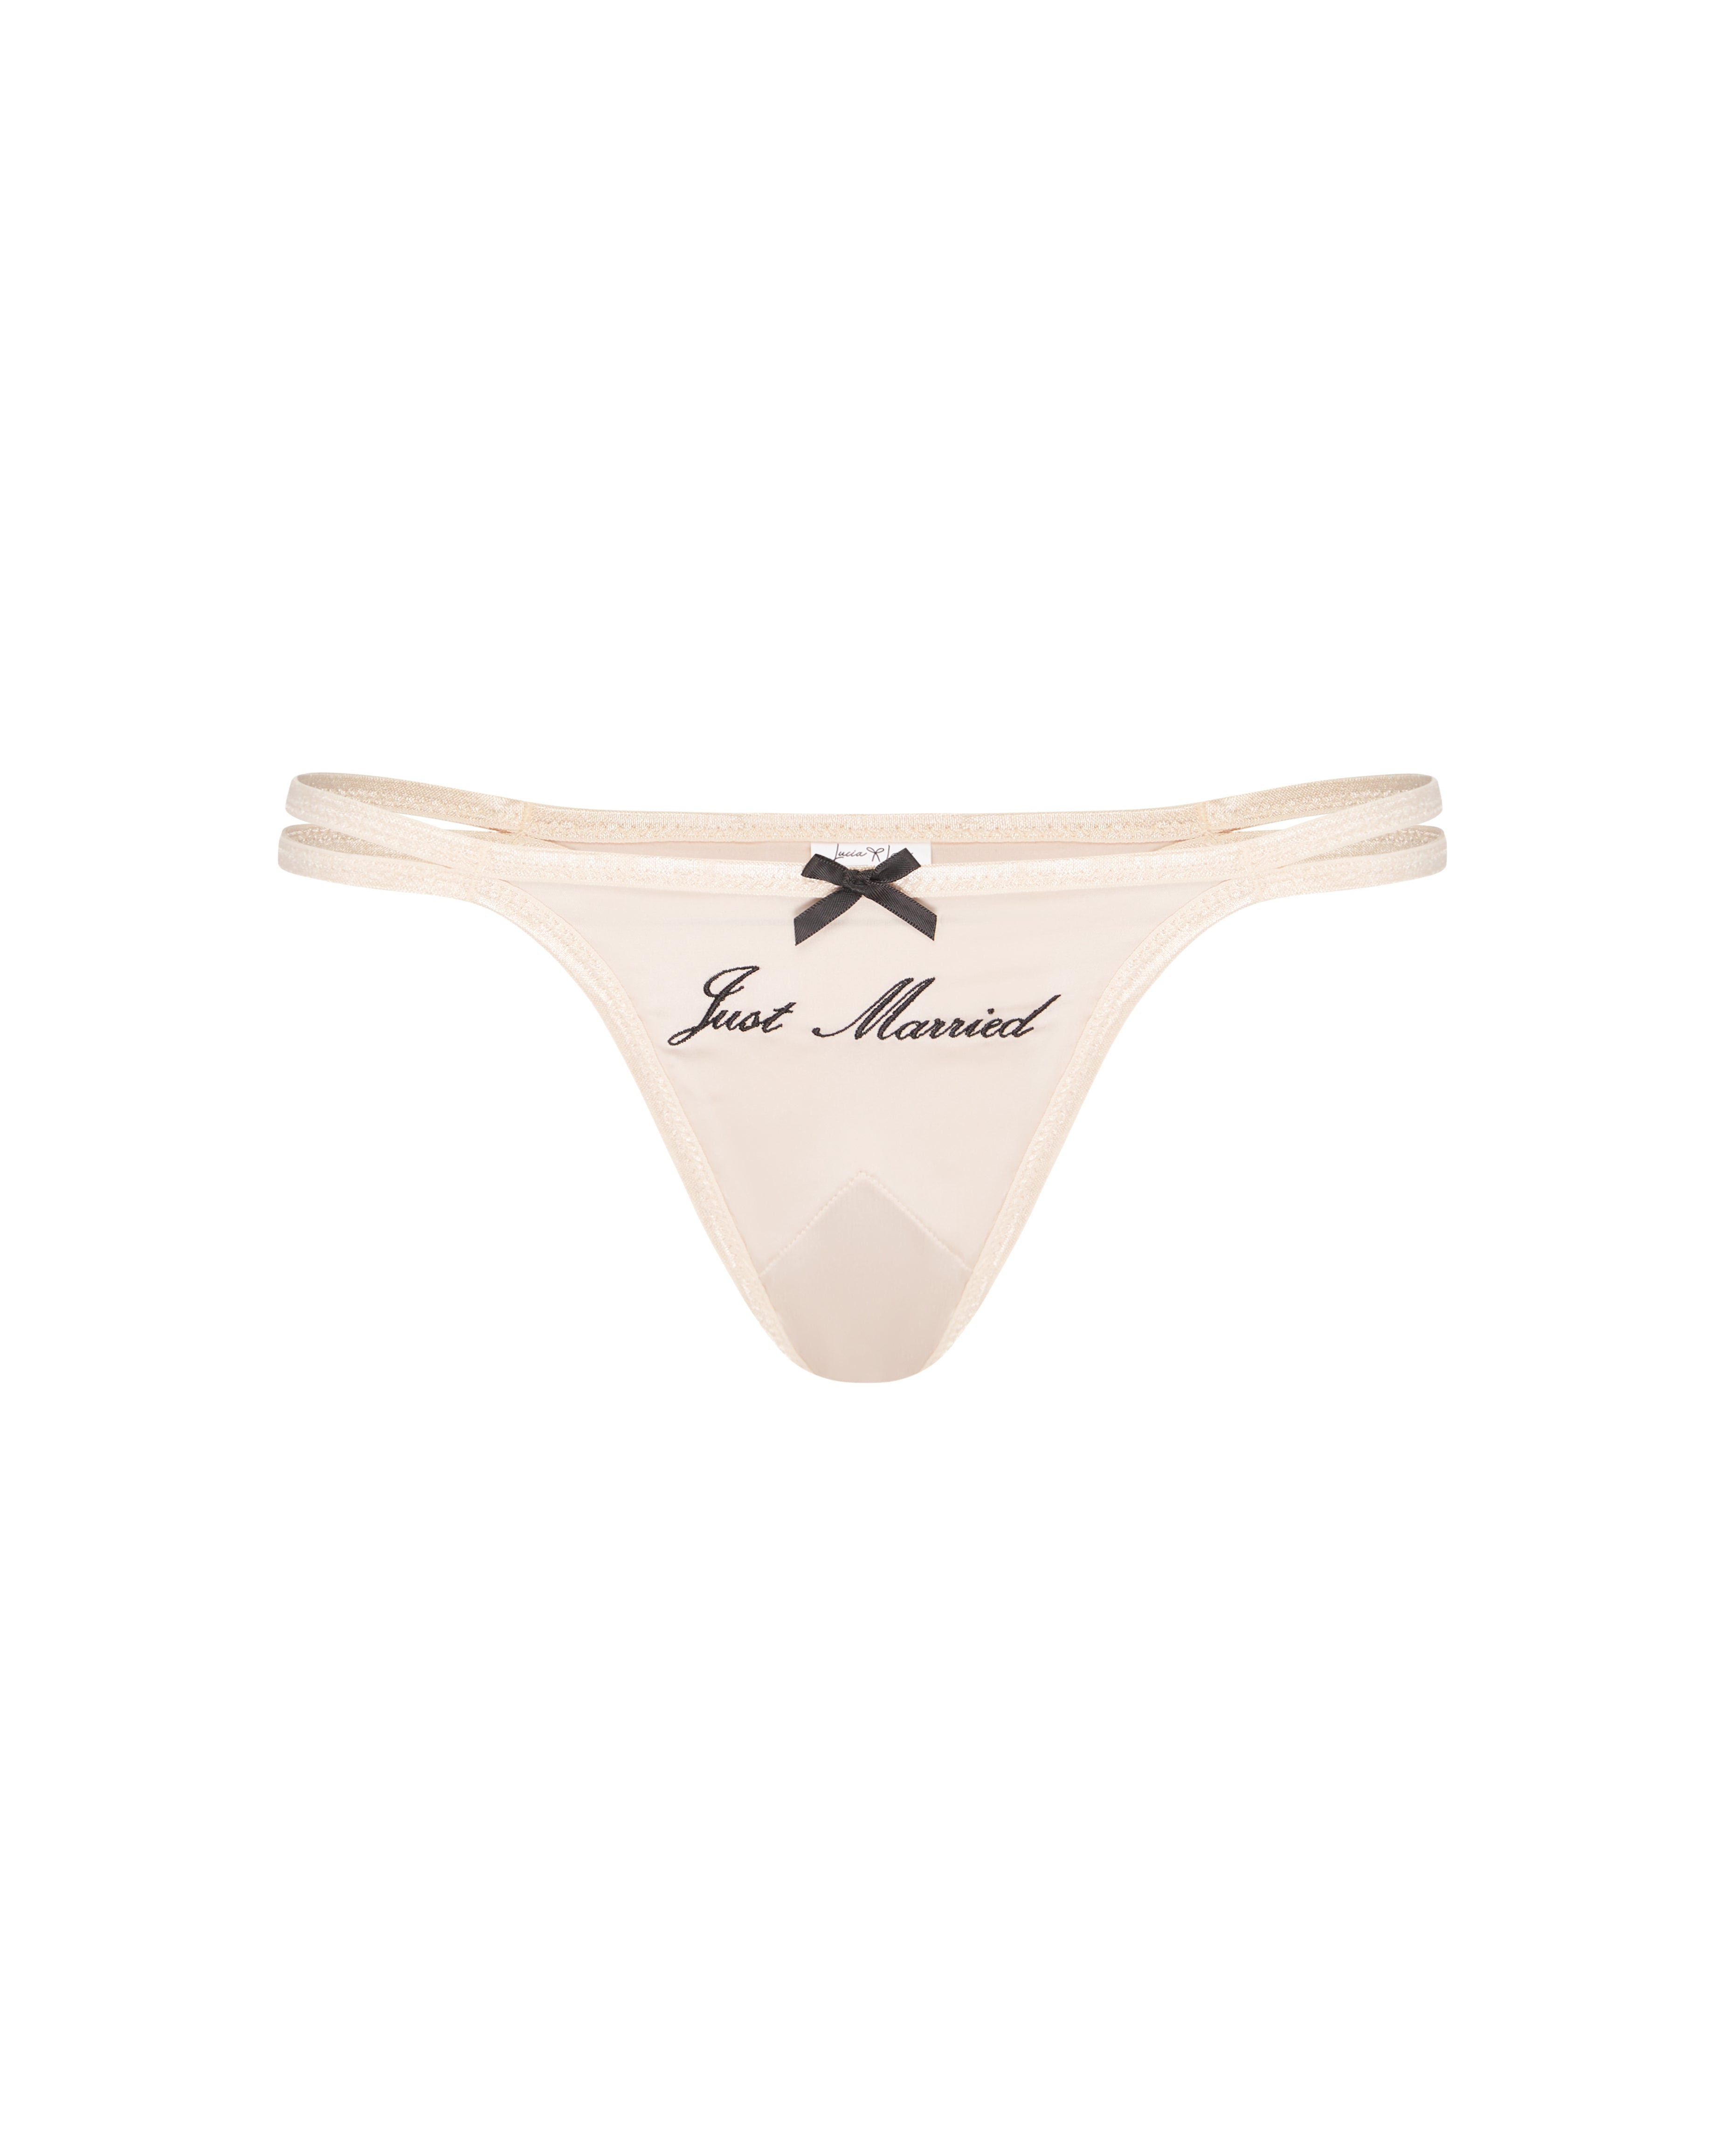 The Just Married Panty – Lucia and Lace